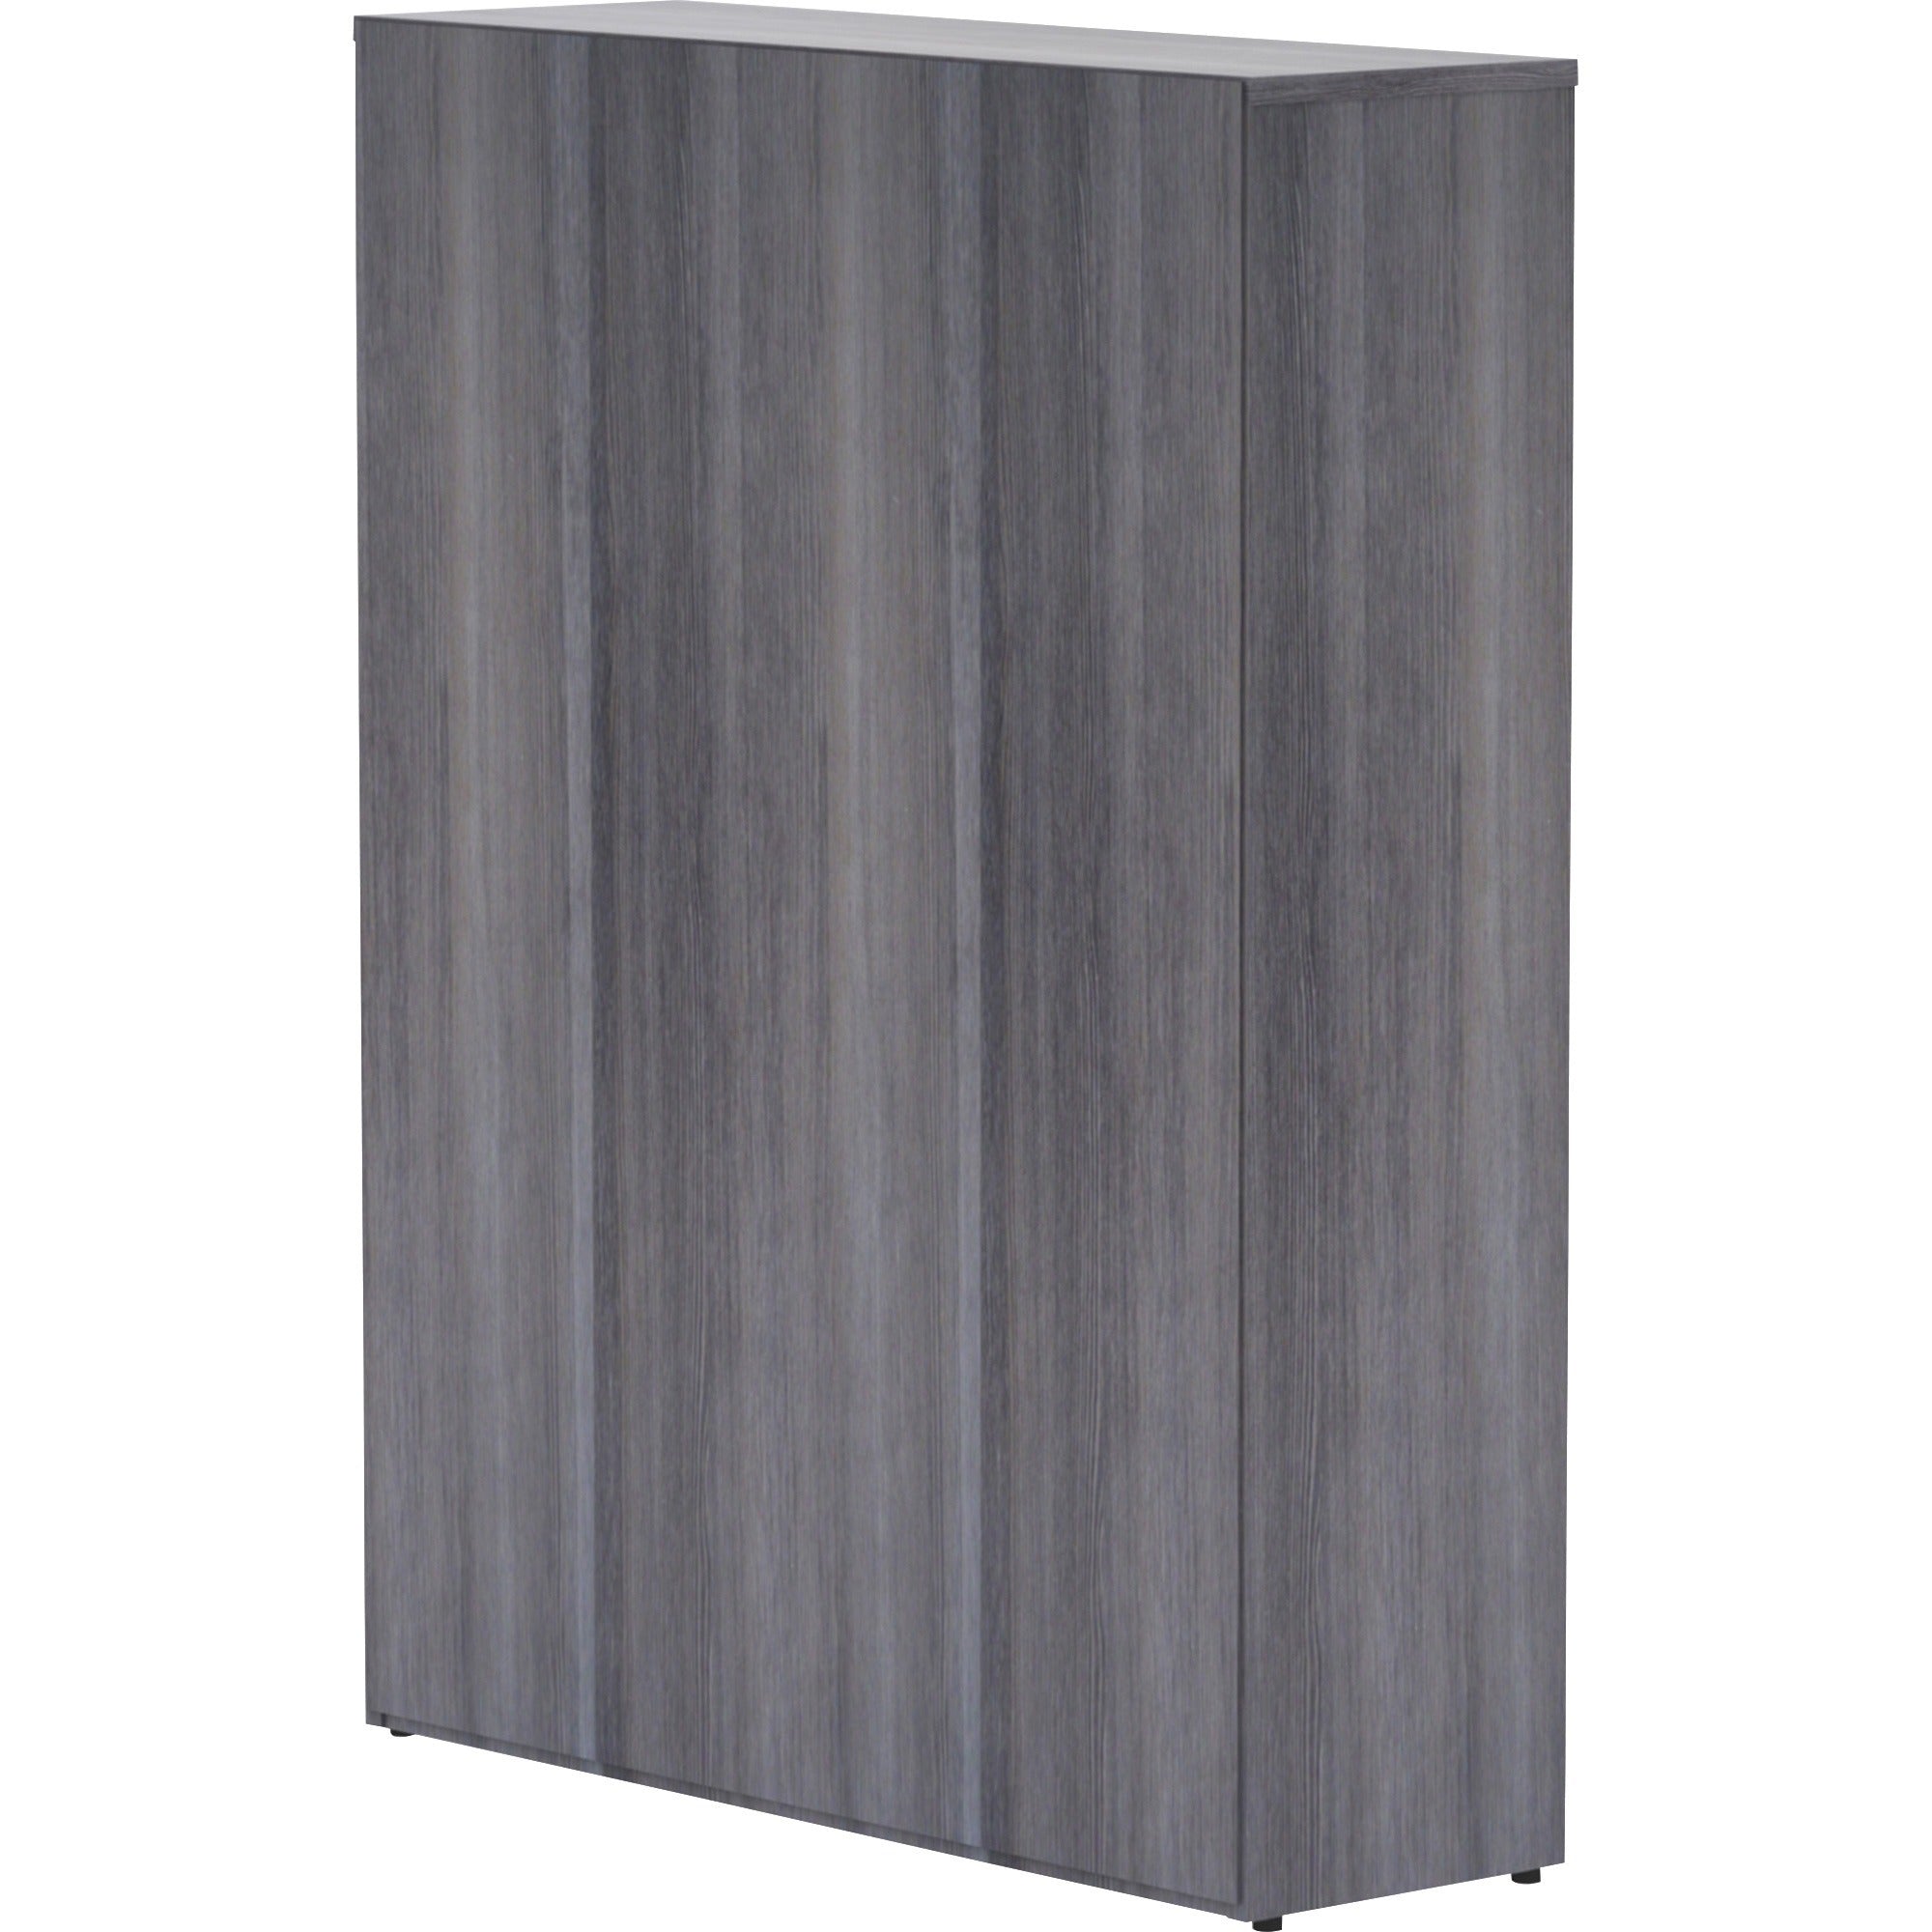 lorell-laminate-bookcase-4-shelfves-48-height-x-36-width-x-12-depth-thermally-fused-laminate-1-each_llr69566 - 4